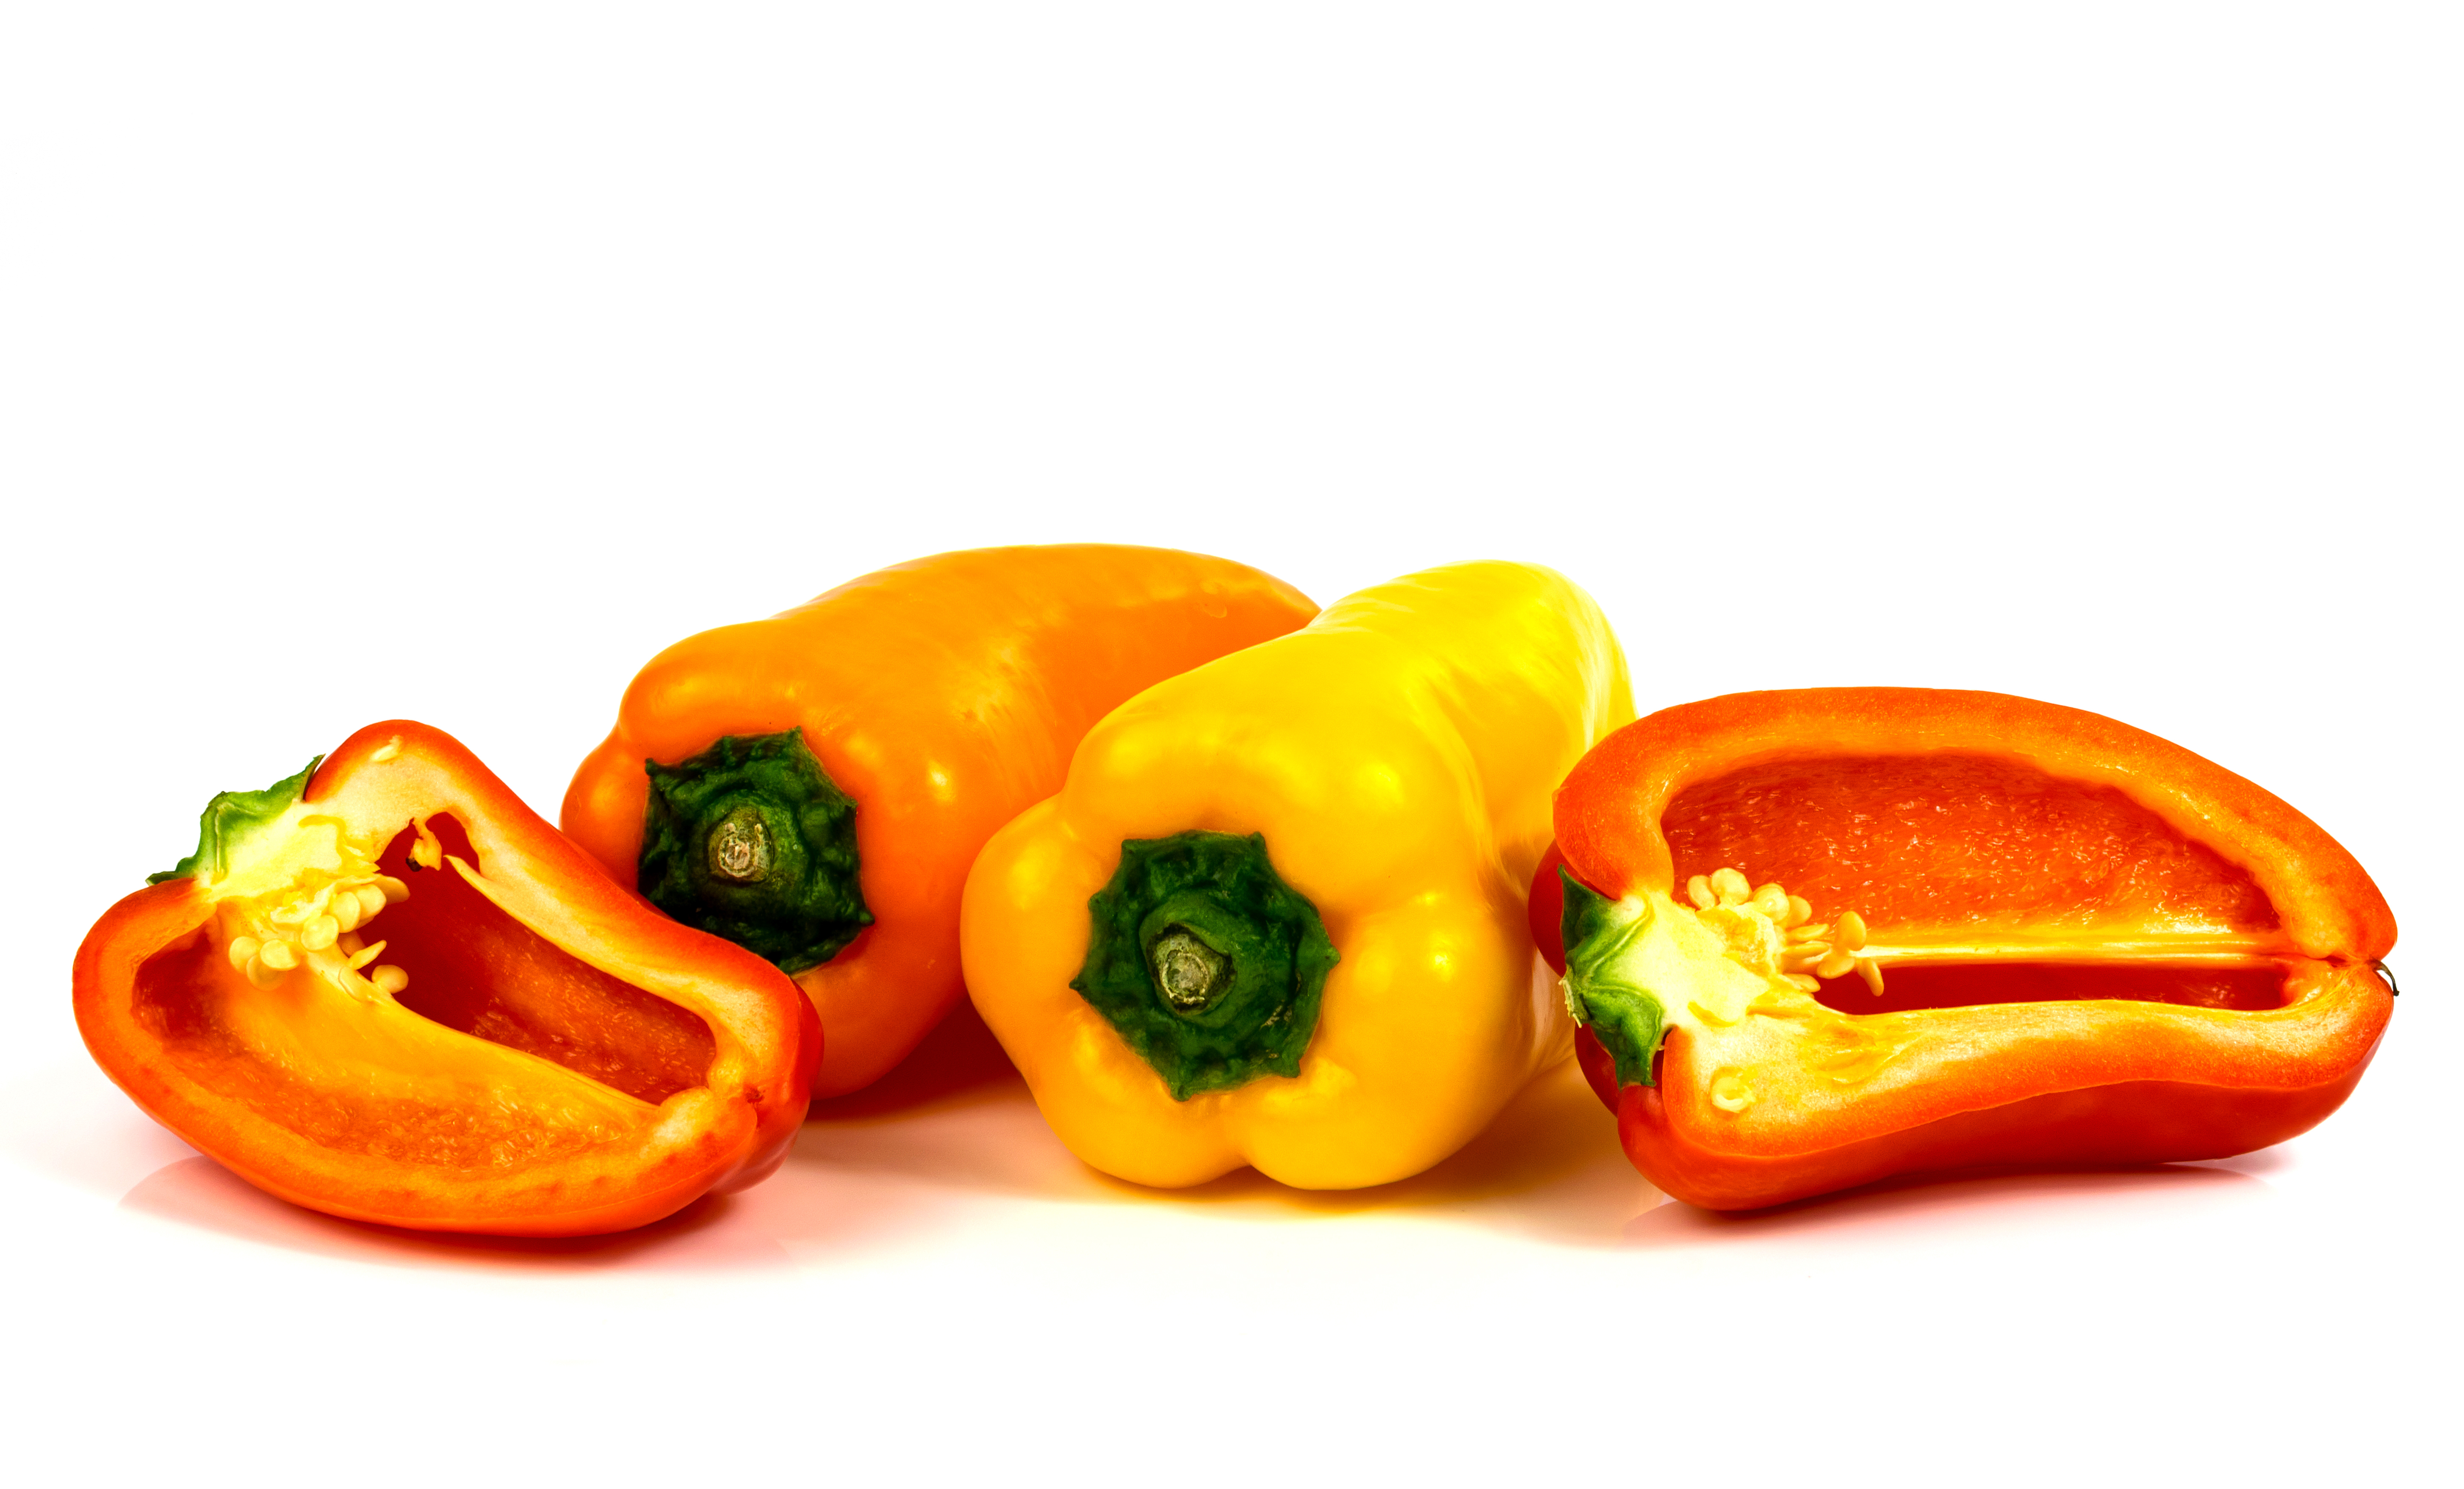 Orange, yellow, and red snack-sized peppers on a a white background. The red pepper is cut in half.